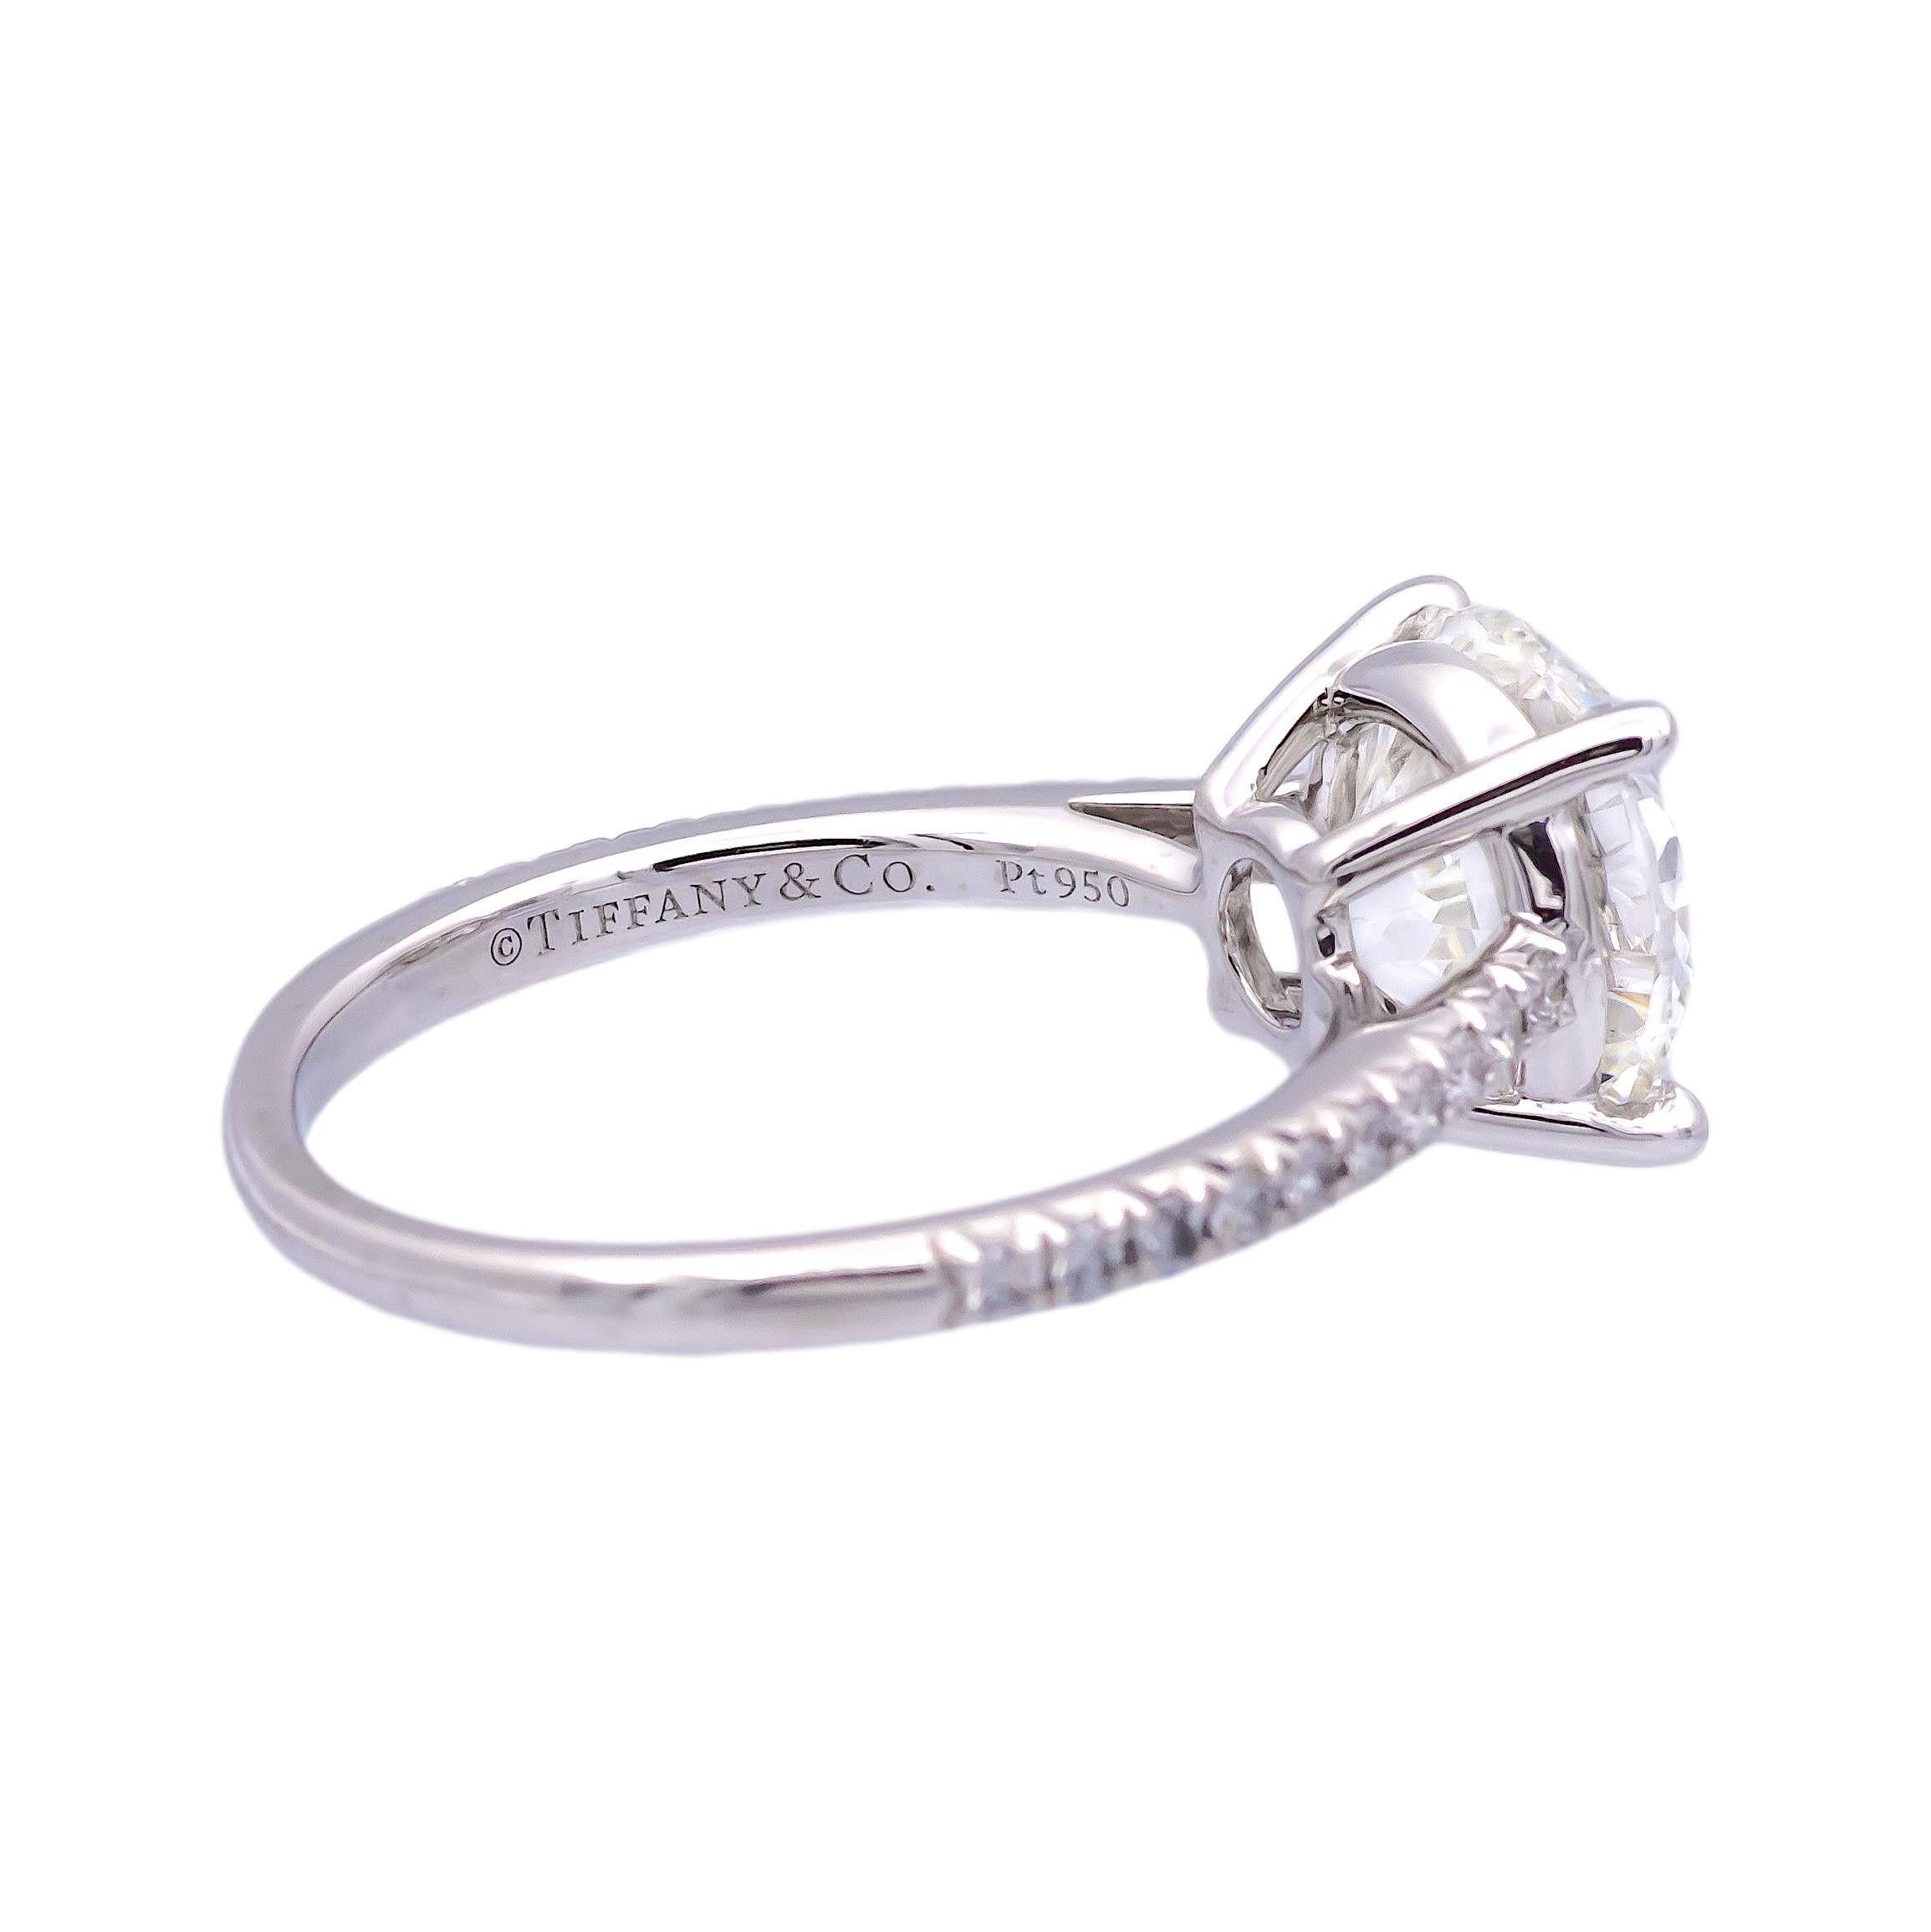 Tiffany & Co. Platinum Novo Round Diamond Engagement Ring 2.55 cts. TW GVS2 In Excellent Condition For Sale In New York, NY